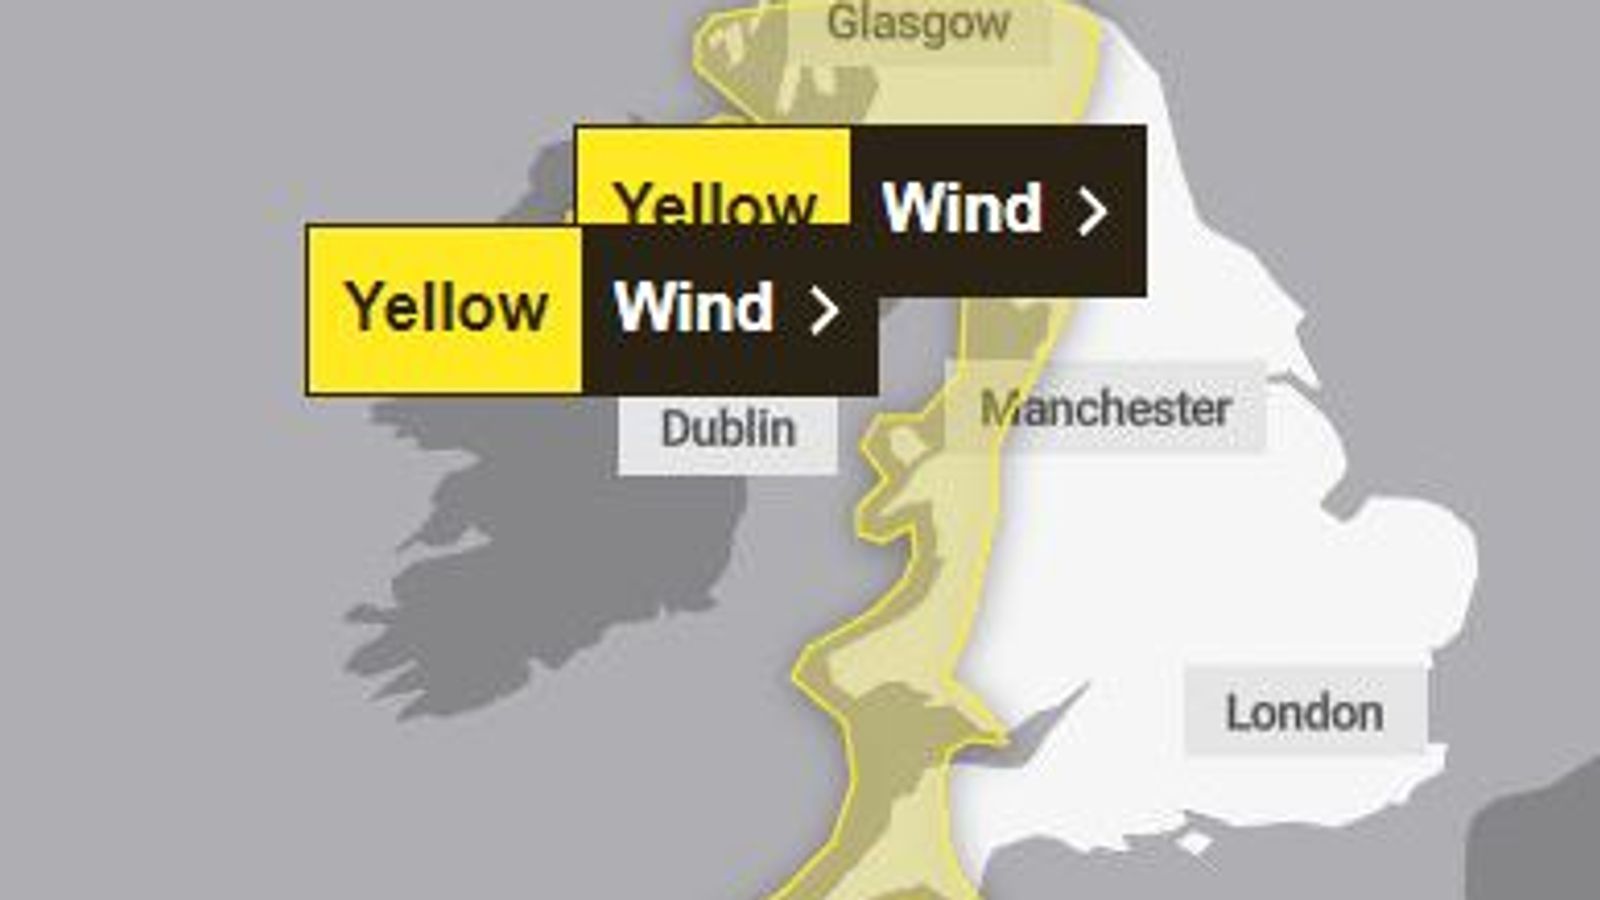 UK weather: Warning of 70mph winds as Storm Kathleen moves in